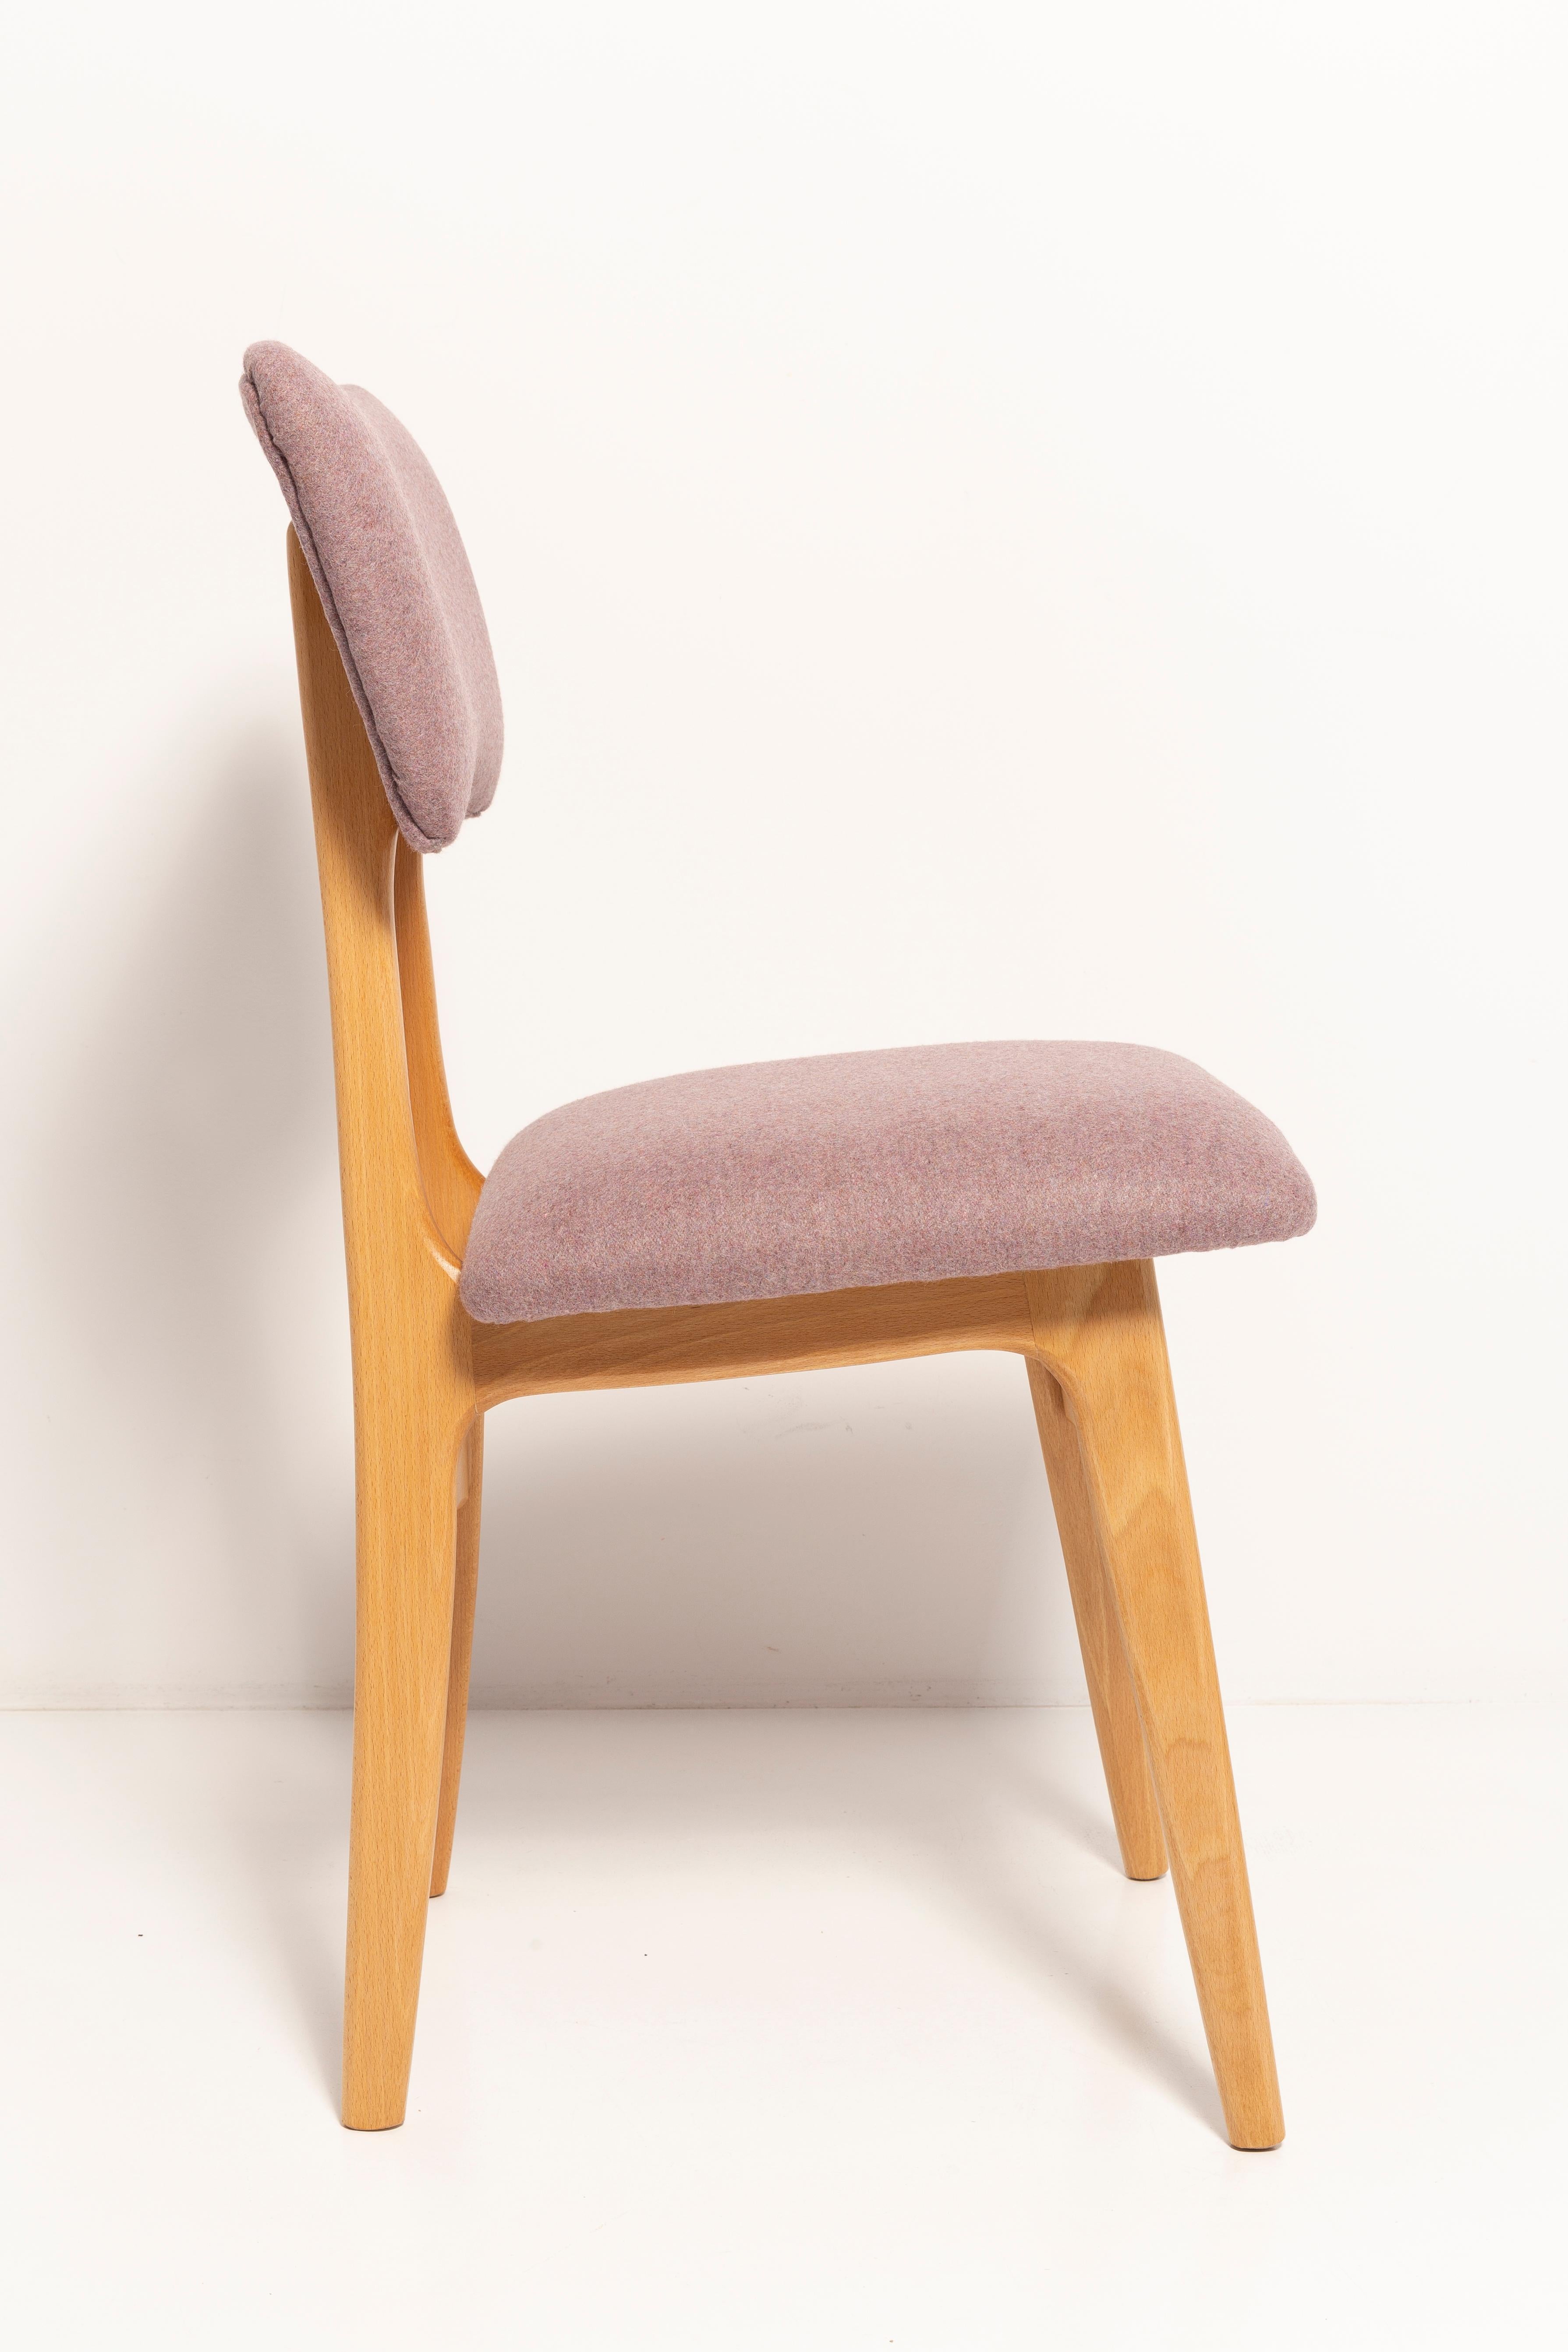 20th Century Butterfly Dining Chair, Pink Wool, Light Wood, Europe, 1960s For Sale 1